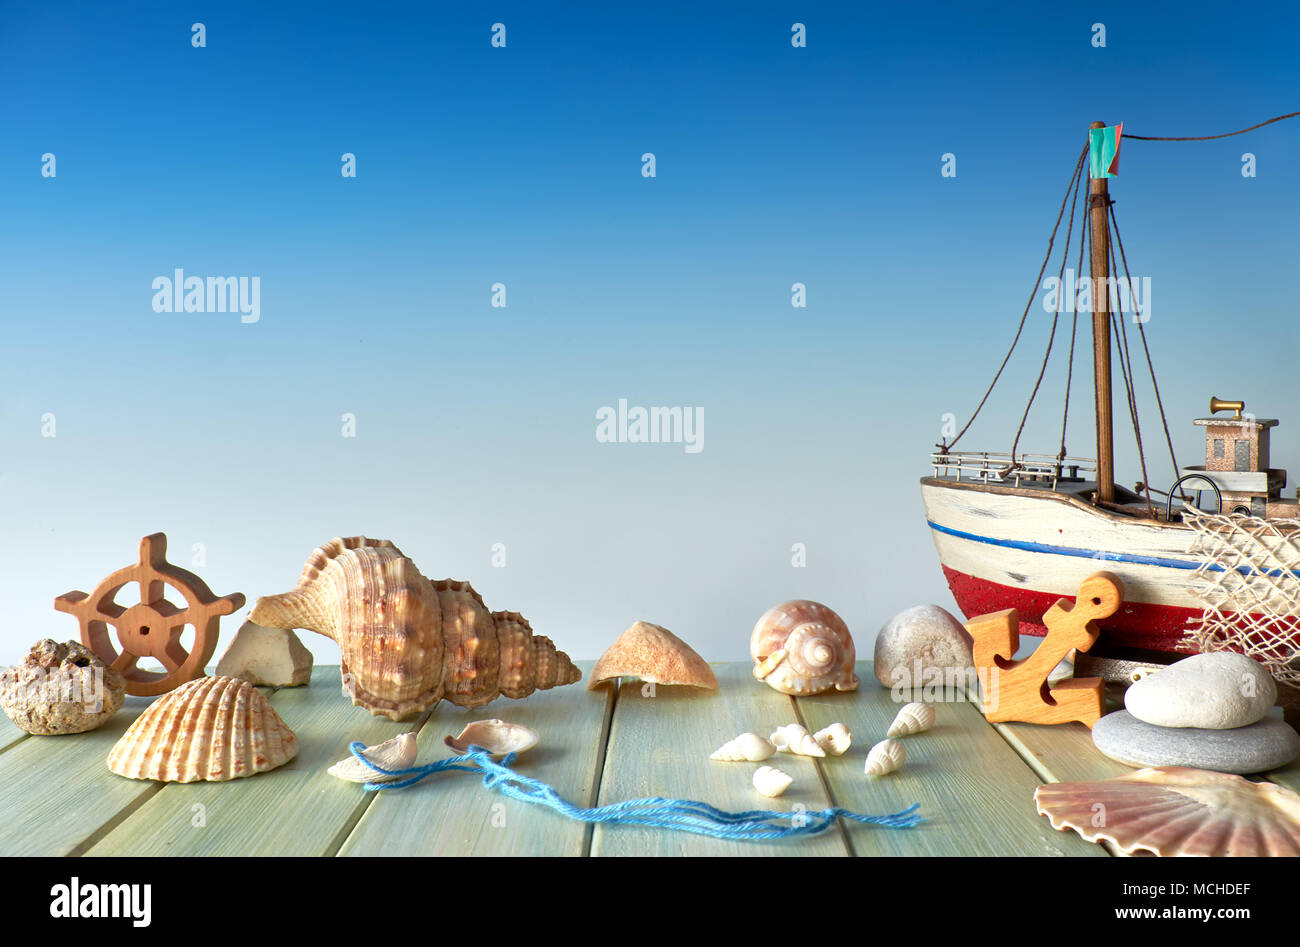 Summertime decorations: sea shells, wooden ship, anchor and stoned on blue gradient background, text space Stock Photo